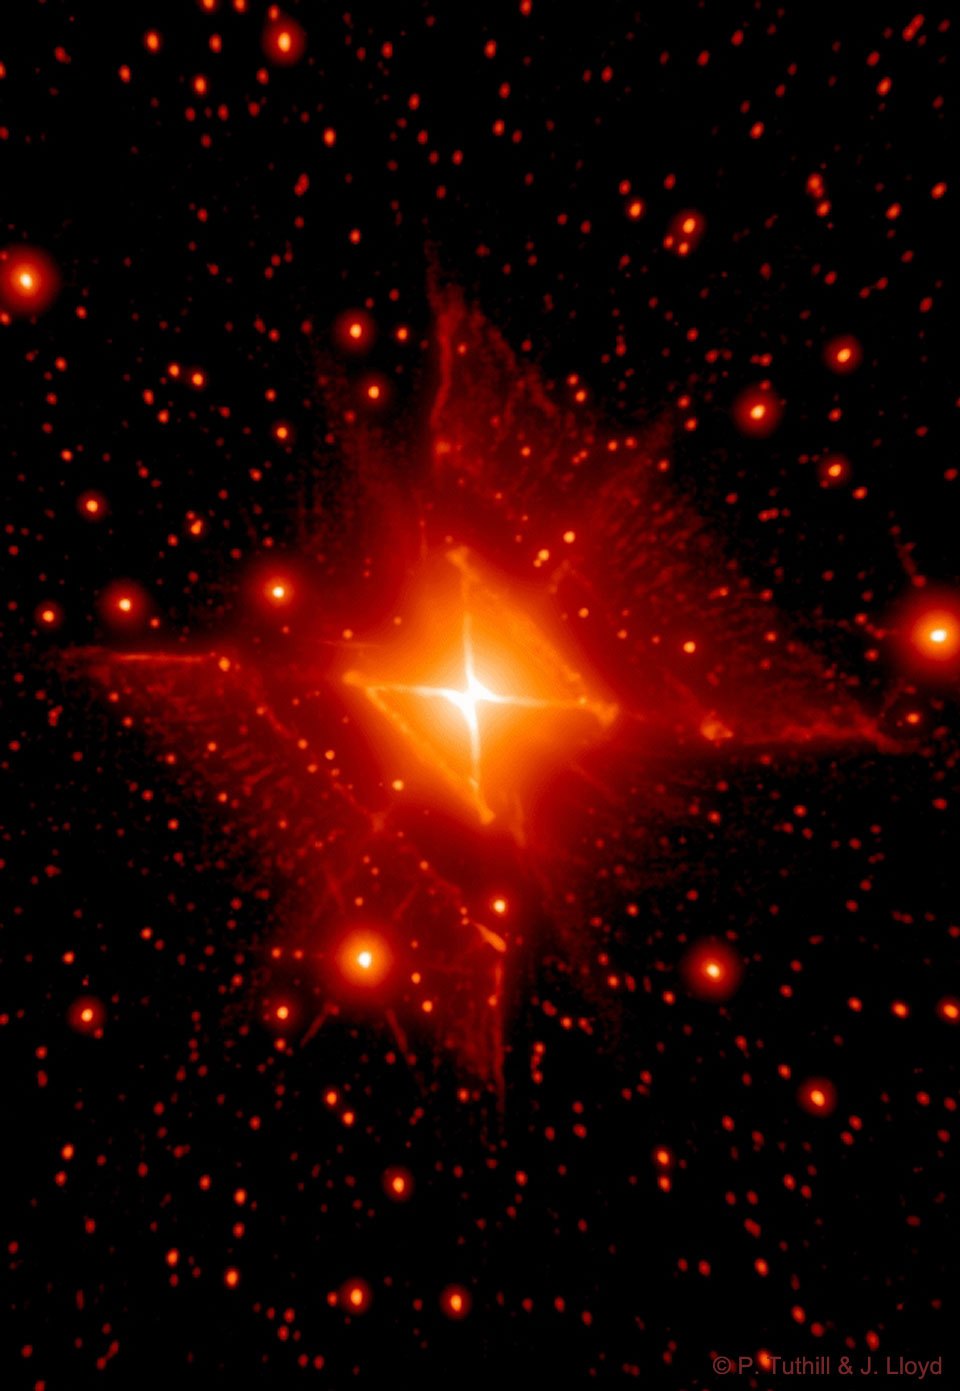 The picture shows the Red Square Nebula, a bipolar
nebula centered on the bright star MWC 922 
Please see the explanation for more detailed information.